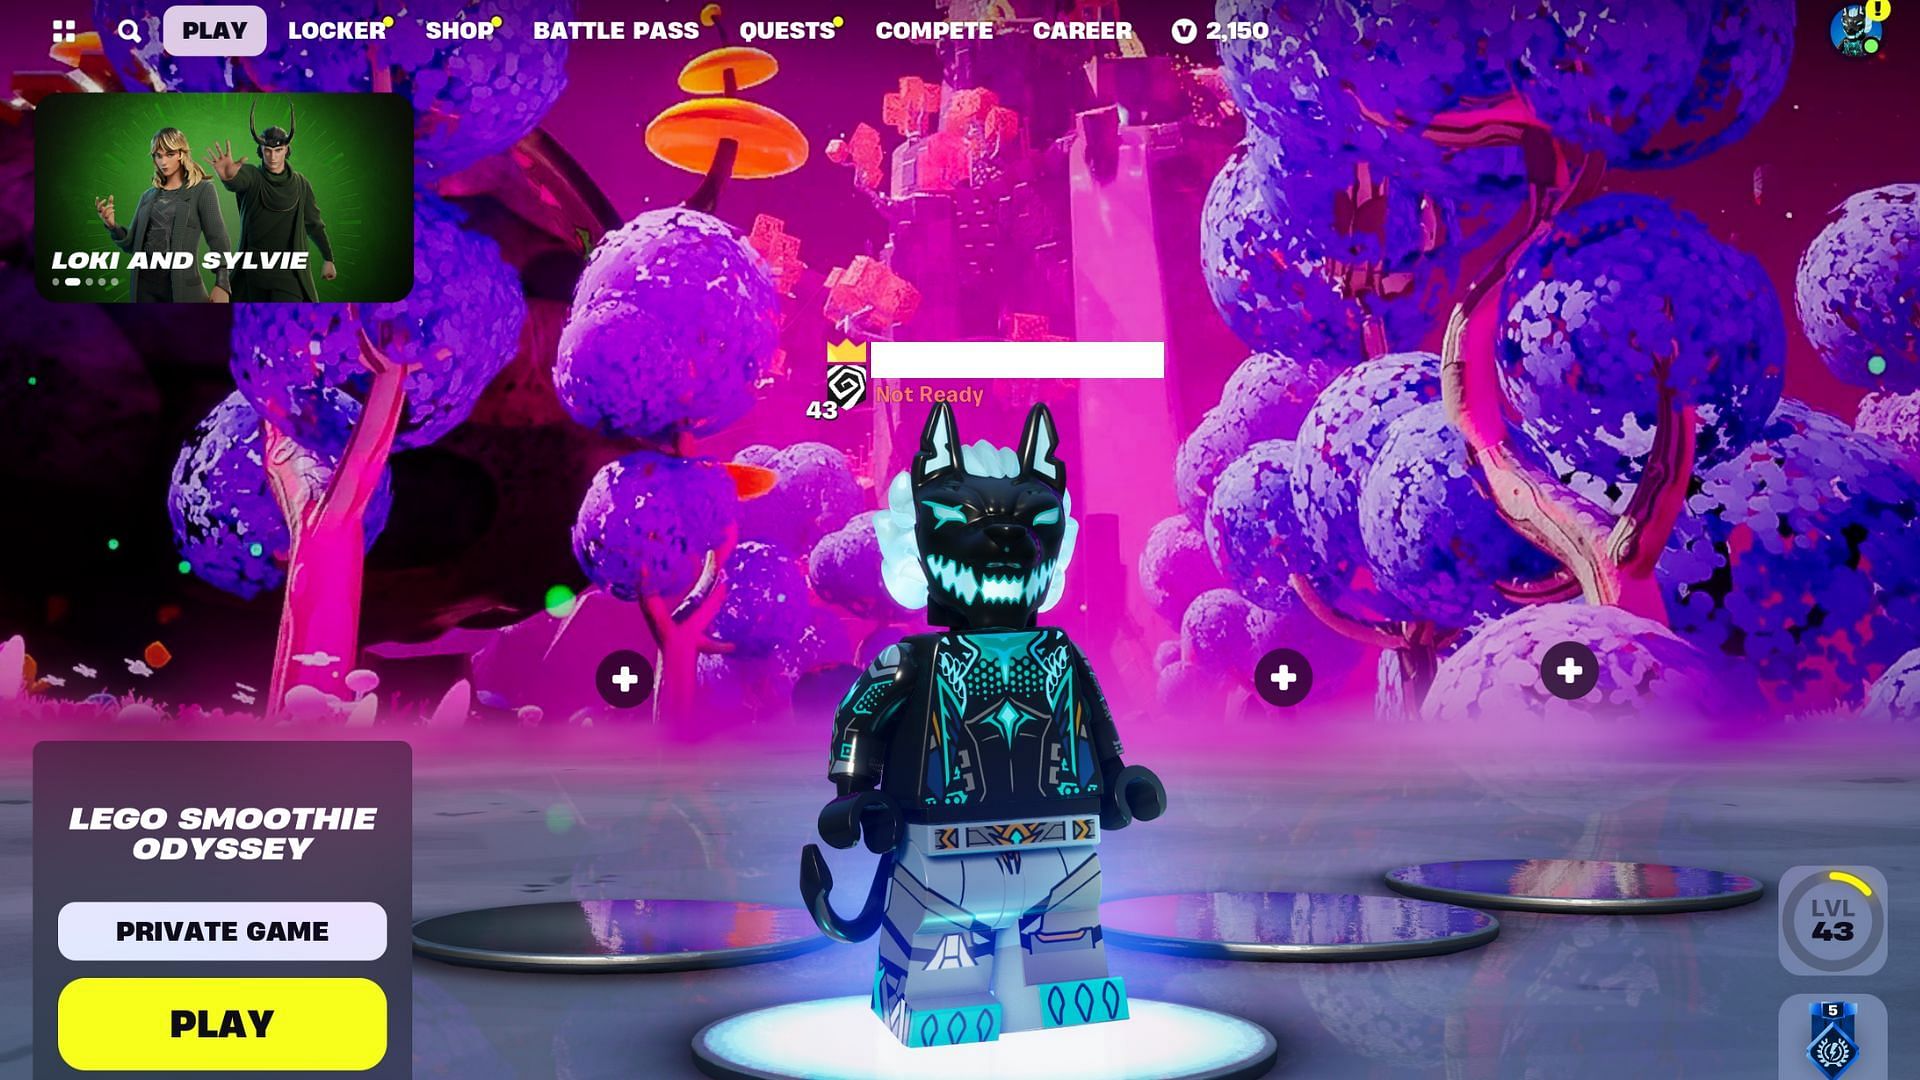 The LEGO Fortnite Smoothie Odyssey map lobby (Image via Epic Games)